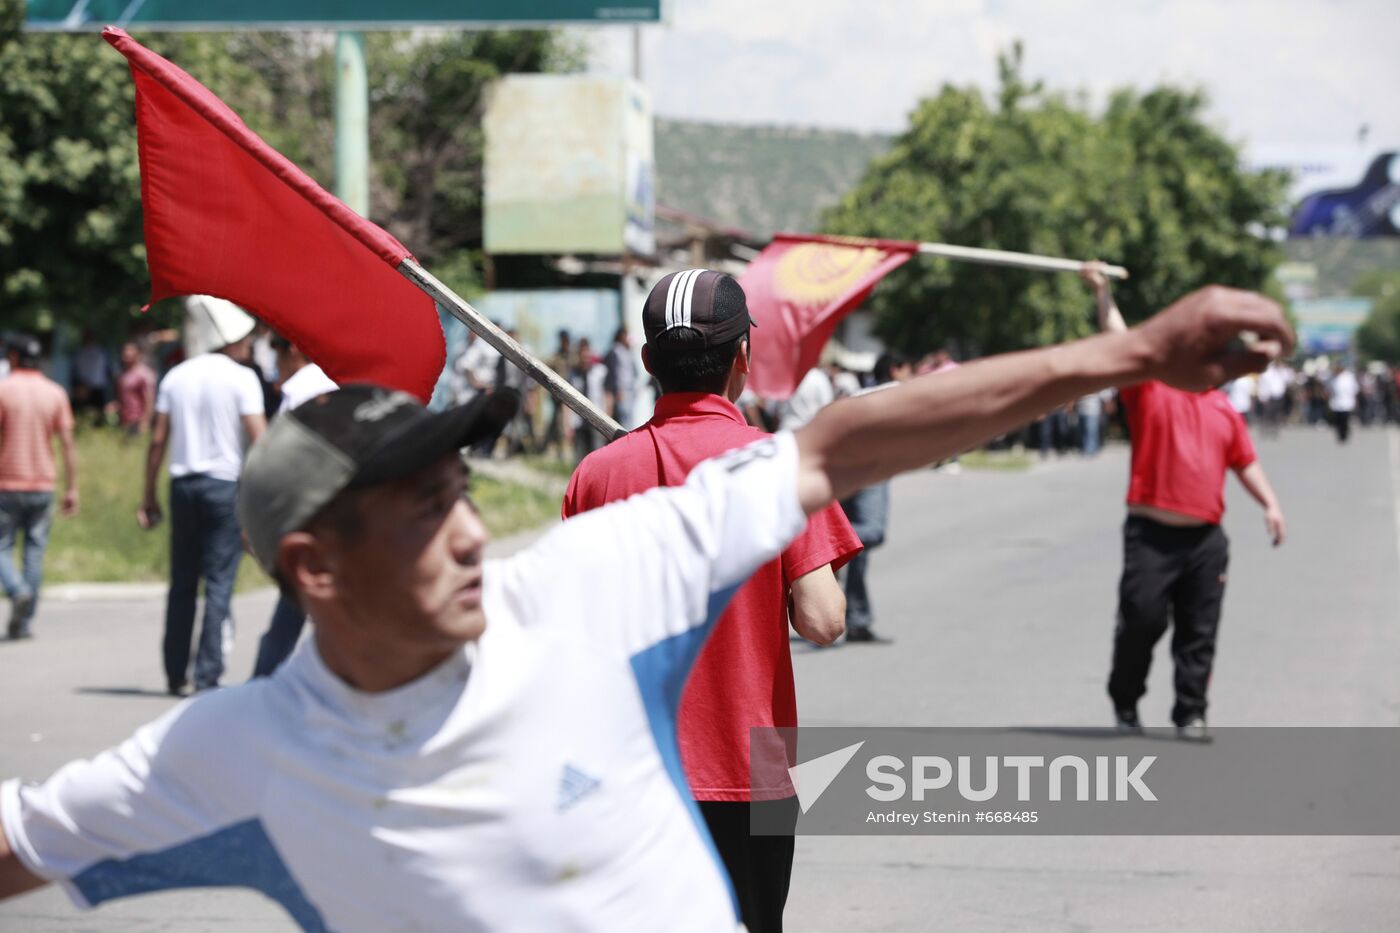 New clashes hit Kyrgyzstan